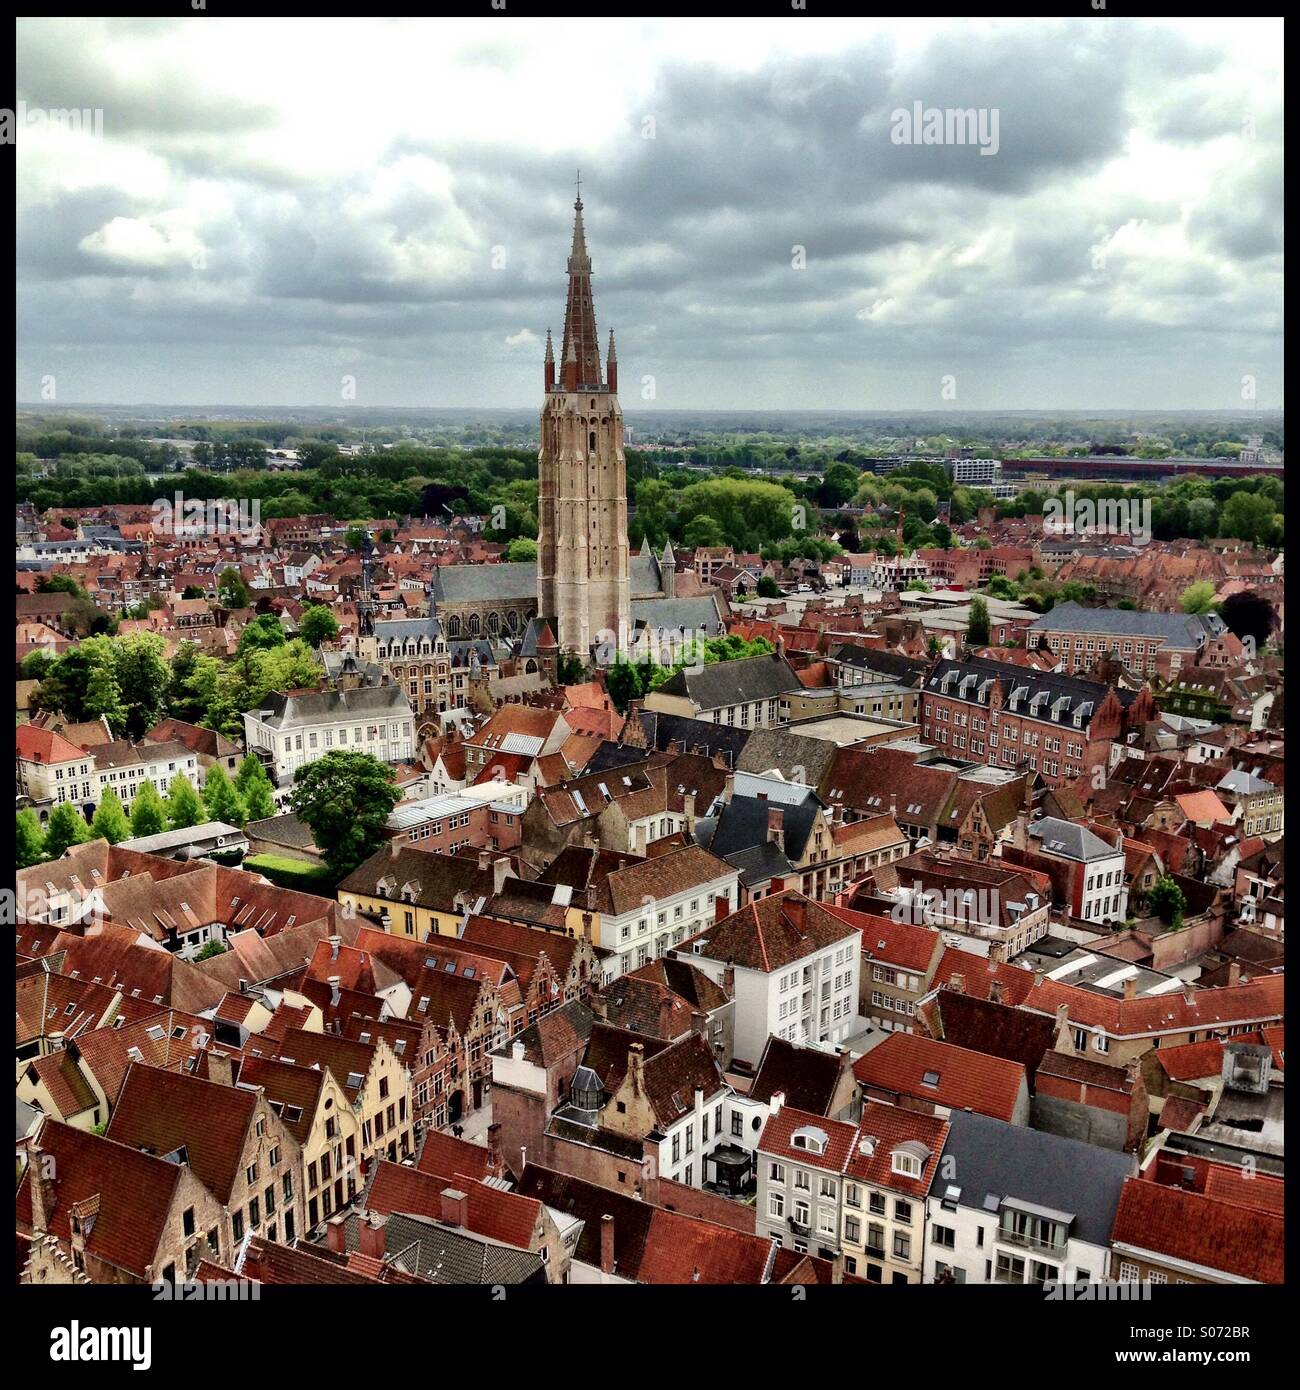 Brugge view Stock Photo